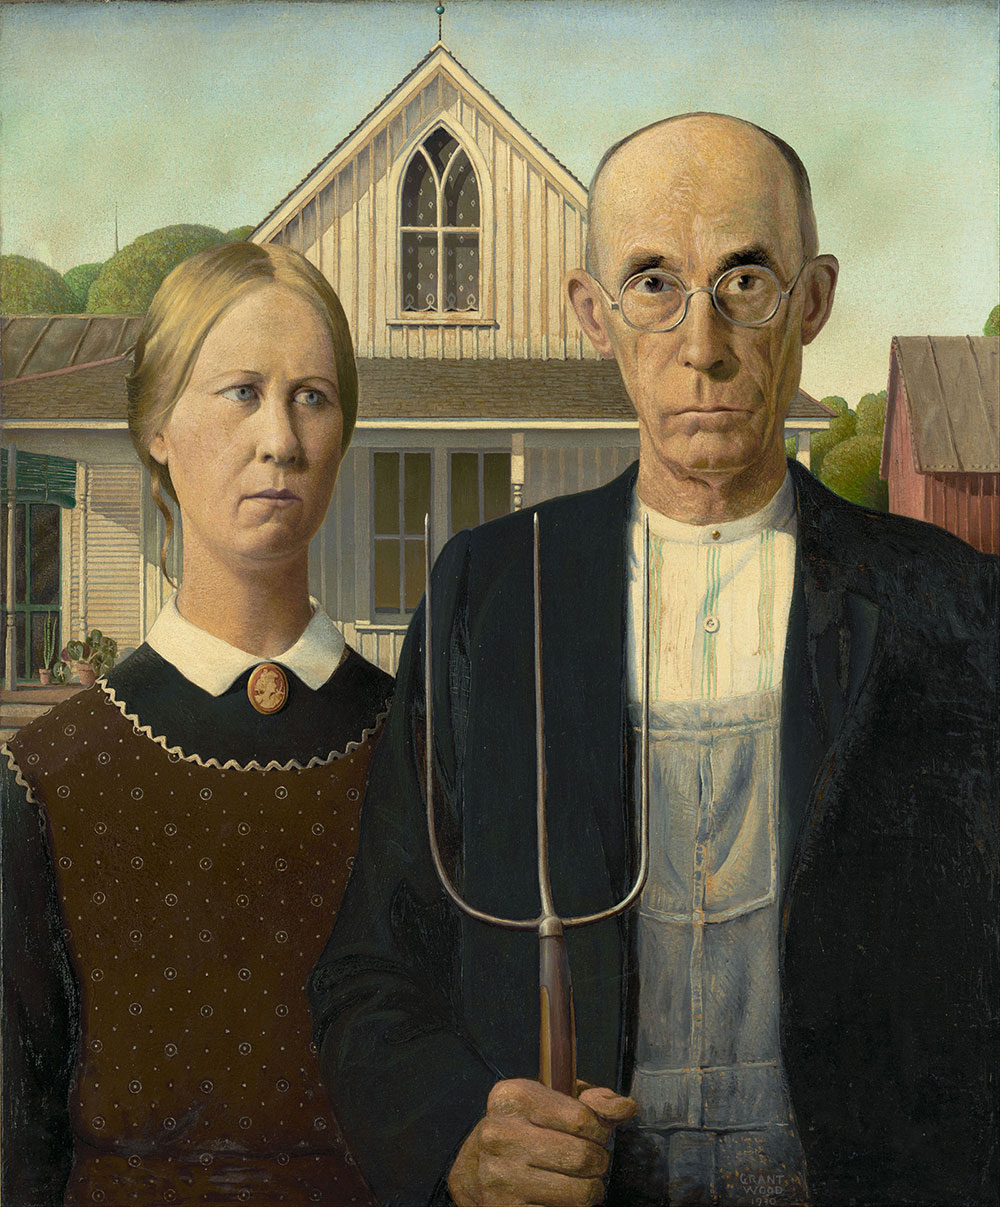 American Gothic Painting By Grant Wood